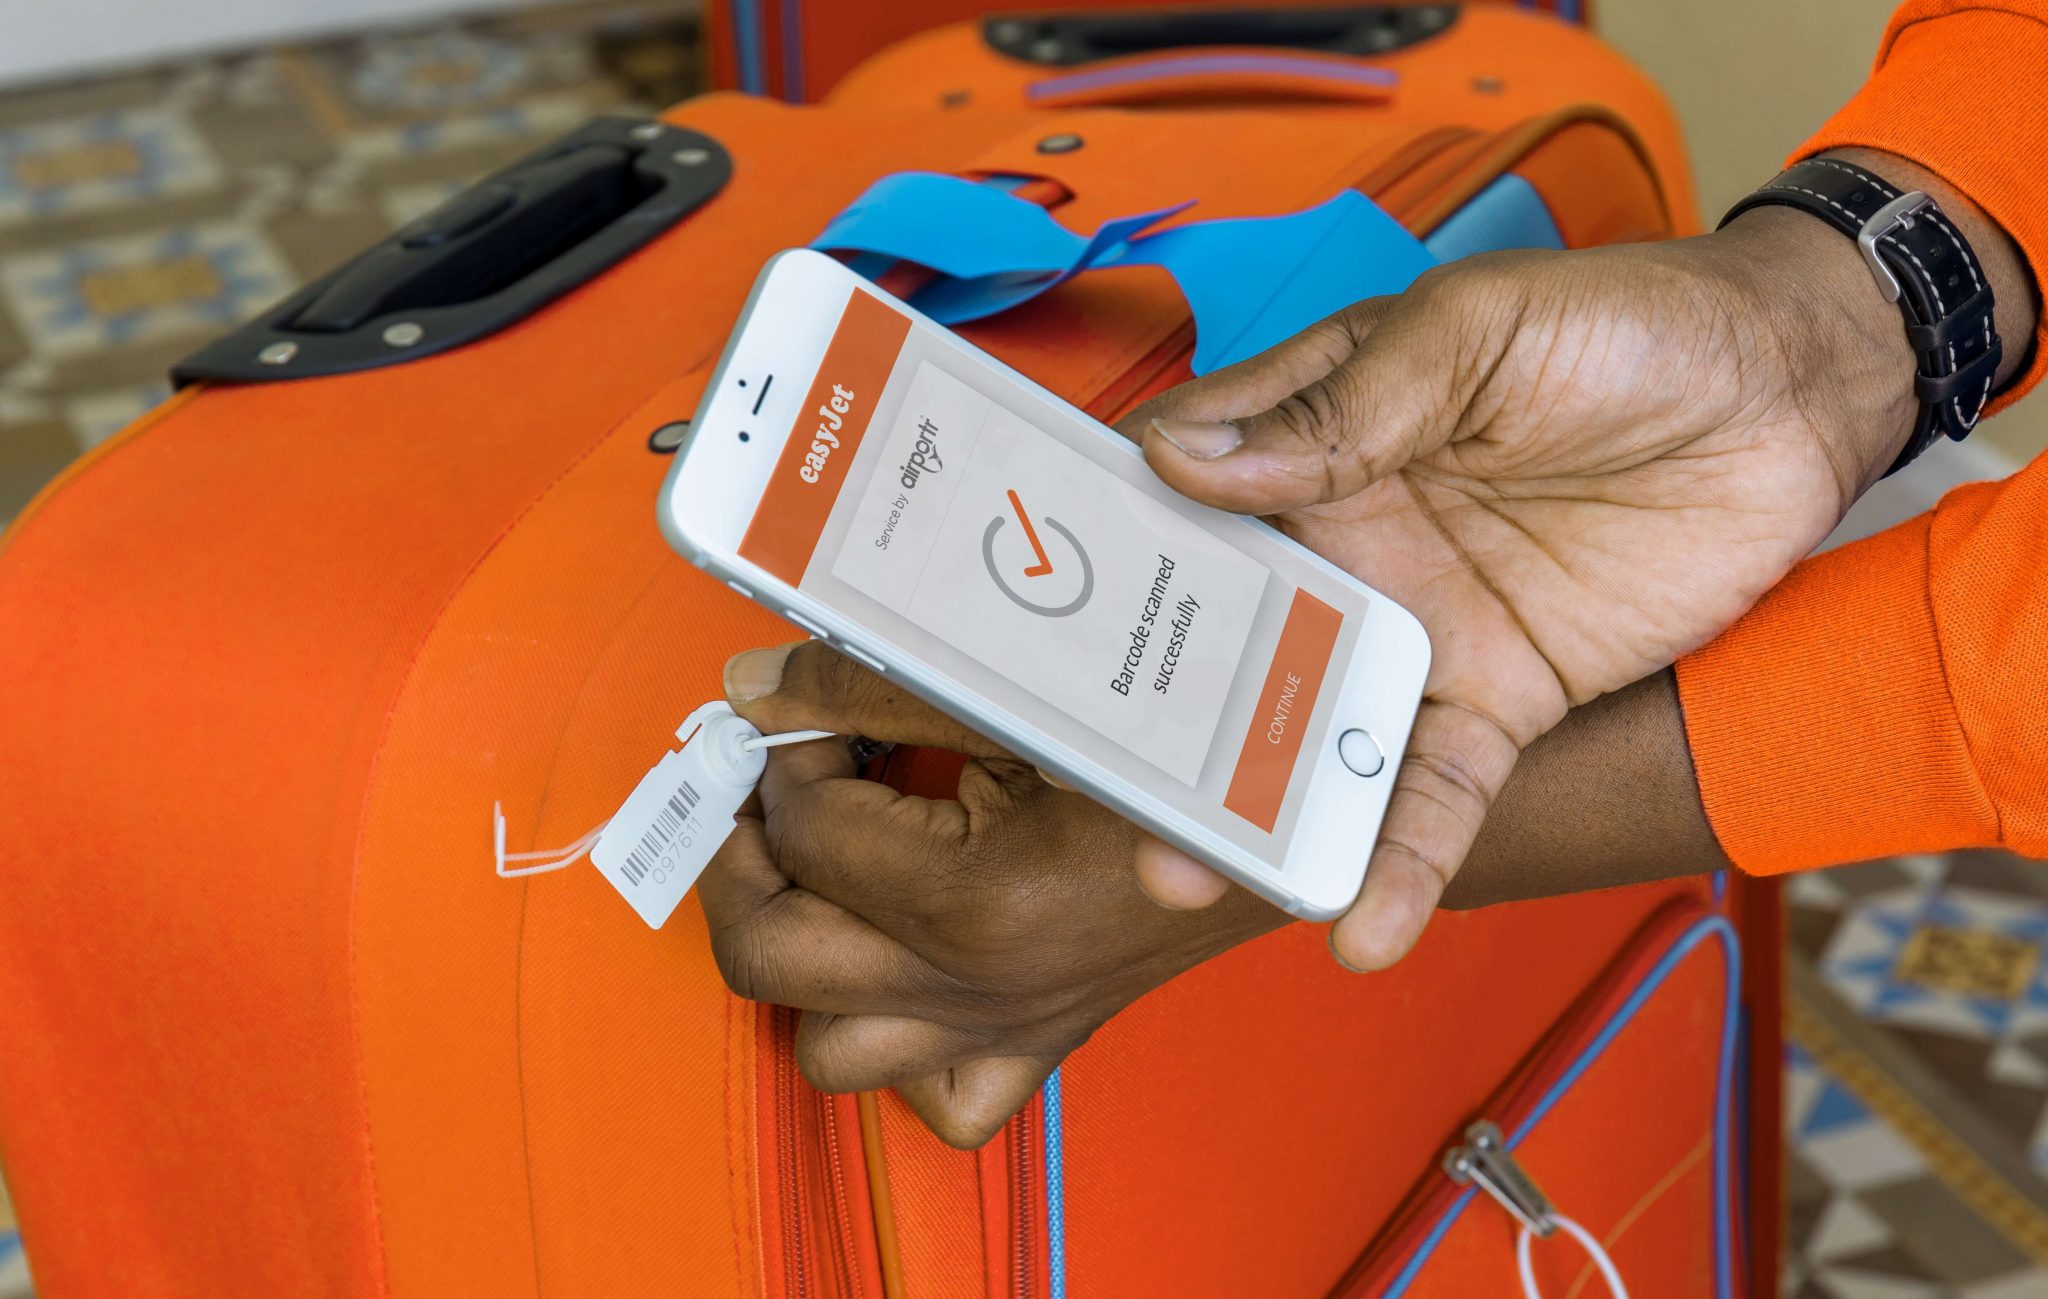 easyJet offers home check-in for luggage